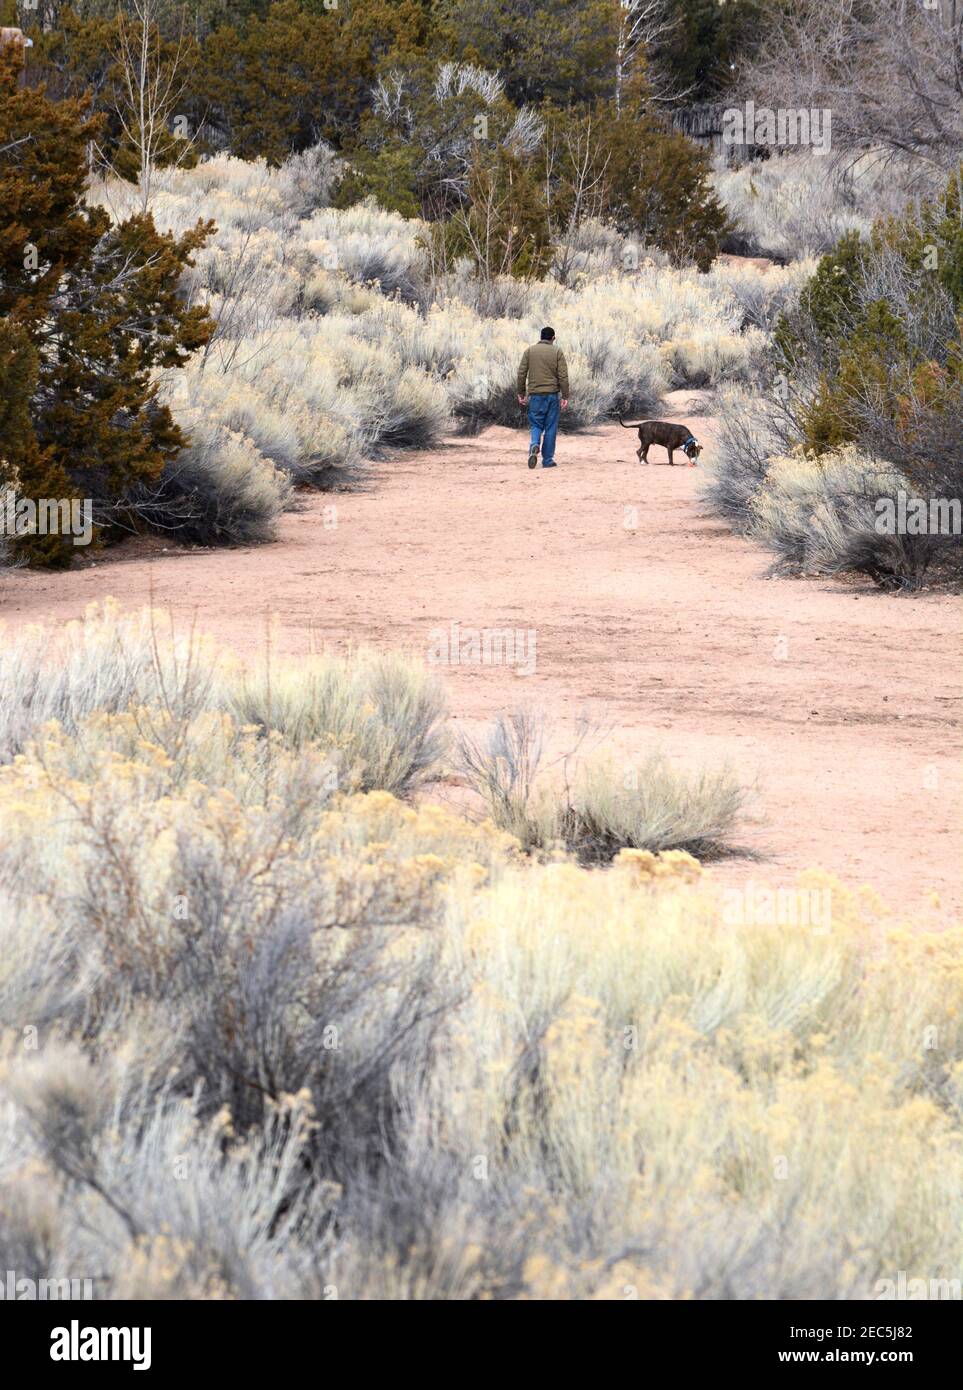 A man walks his dog in a dry arroyo, or riverbed, in Sante Fe, New Mexico. Stock Photo